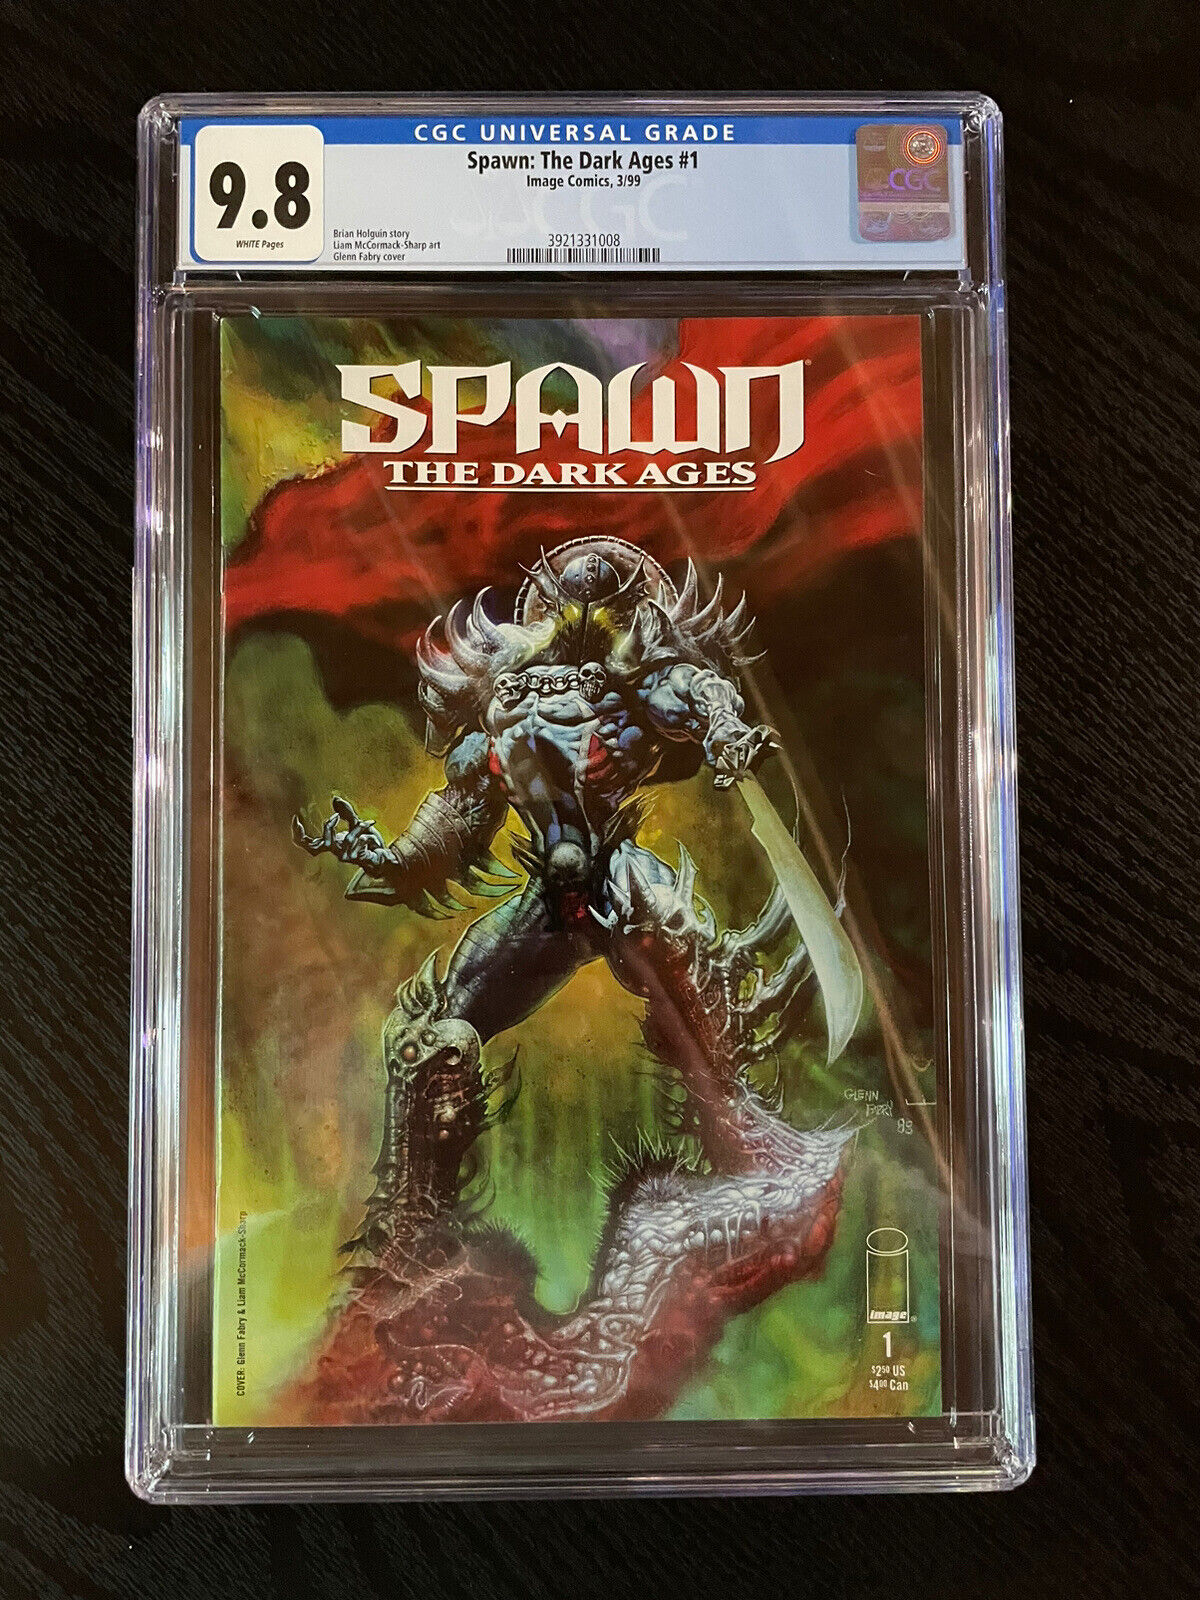 Spawn The Dark Ages 1 CGC 9.8 NM/M White Pages Image New Slab McFarlane Fabry